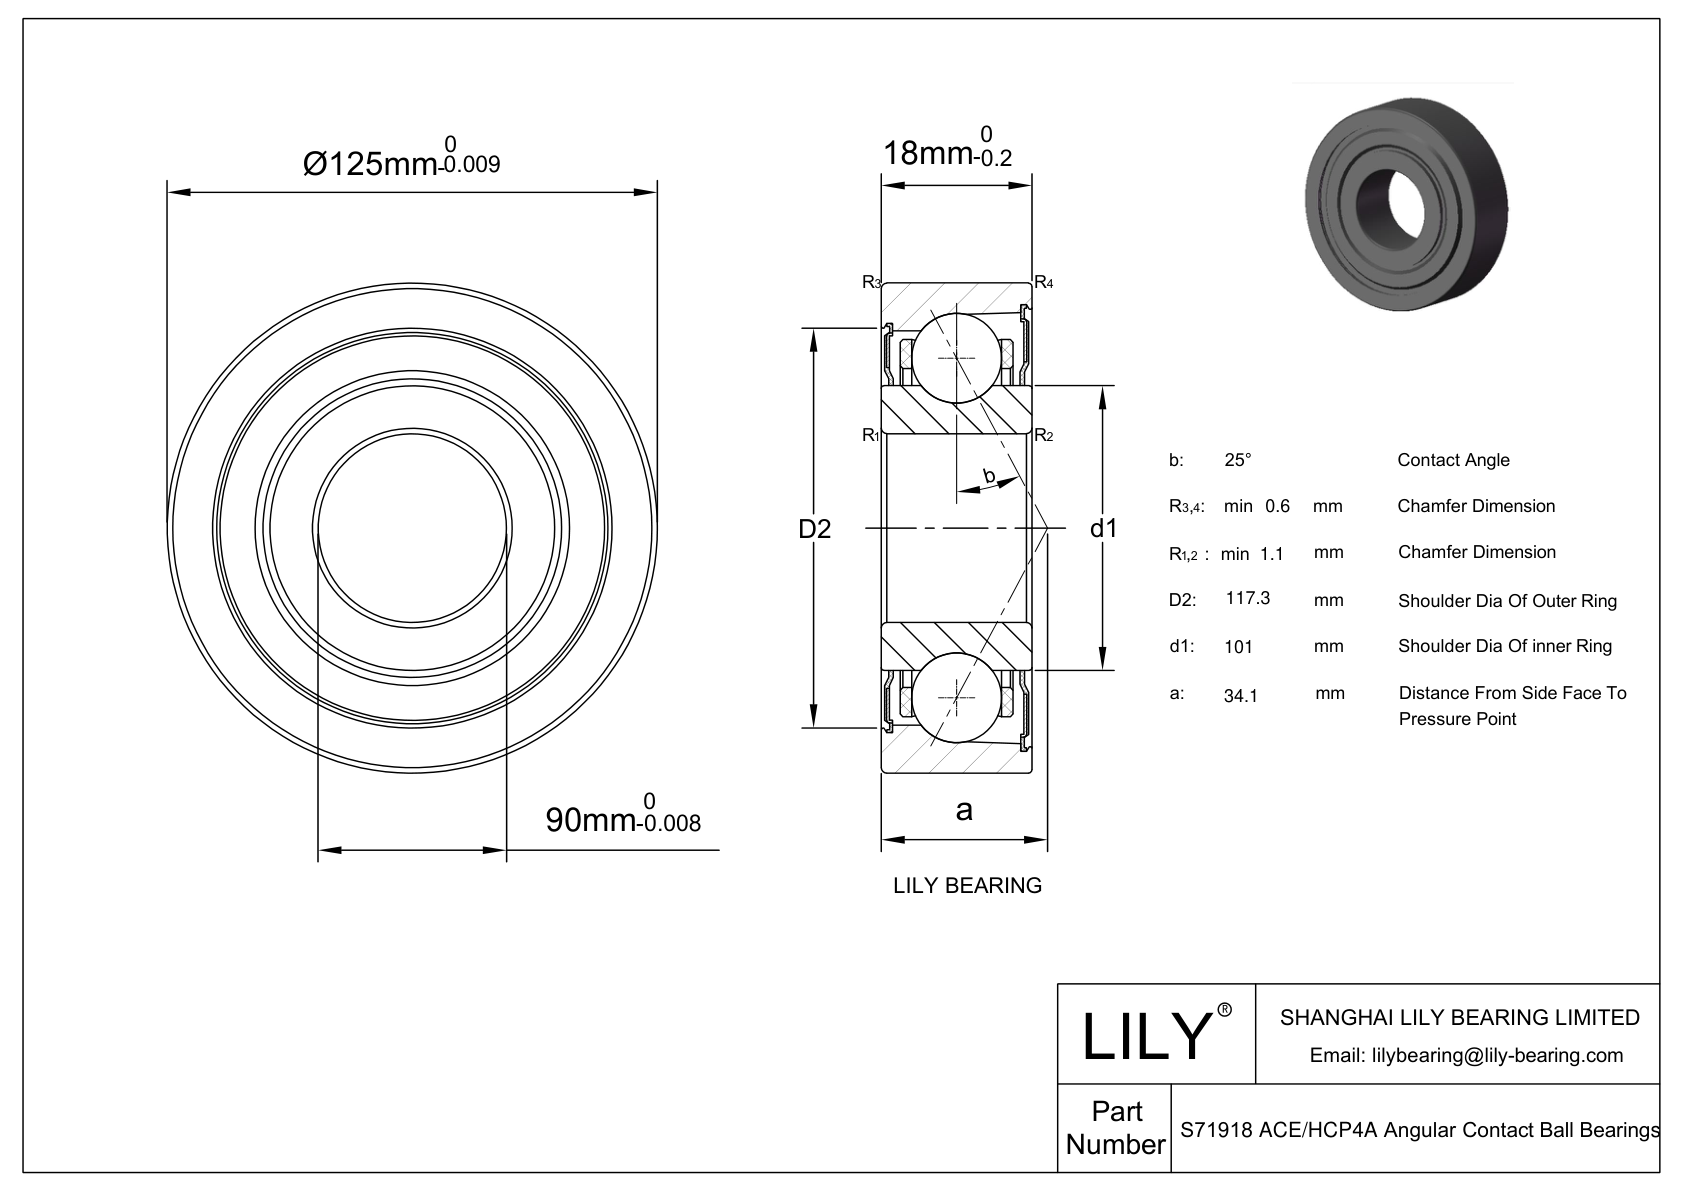 S71918 ACE/HCP4A Super Precision Angular Contact Ball Bearings cad drawing